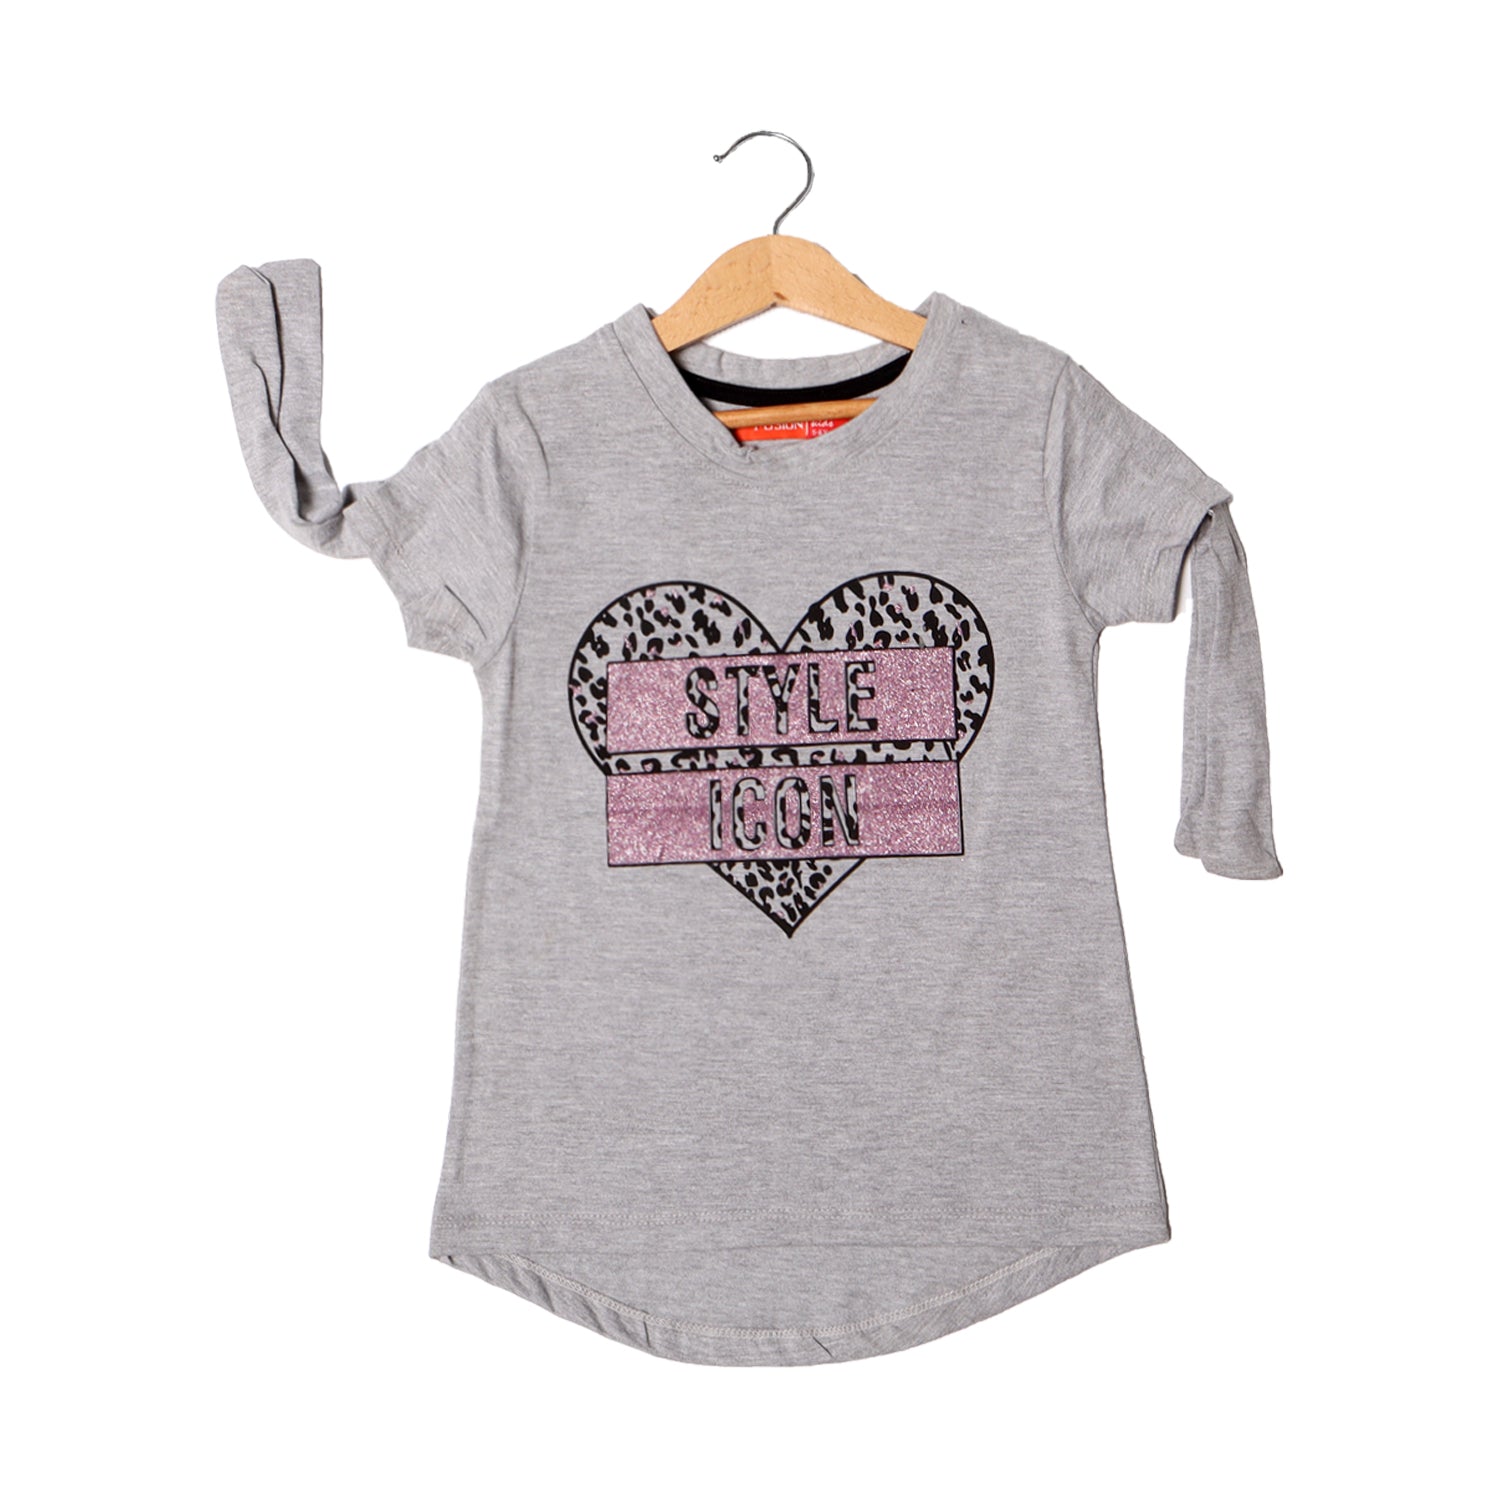 HAZEL GREY HEART STYLE ICON PRINTED T-SHIRT FOR GIRLS